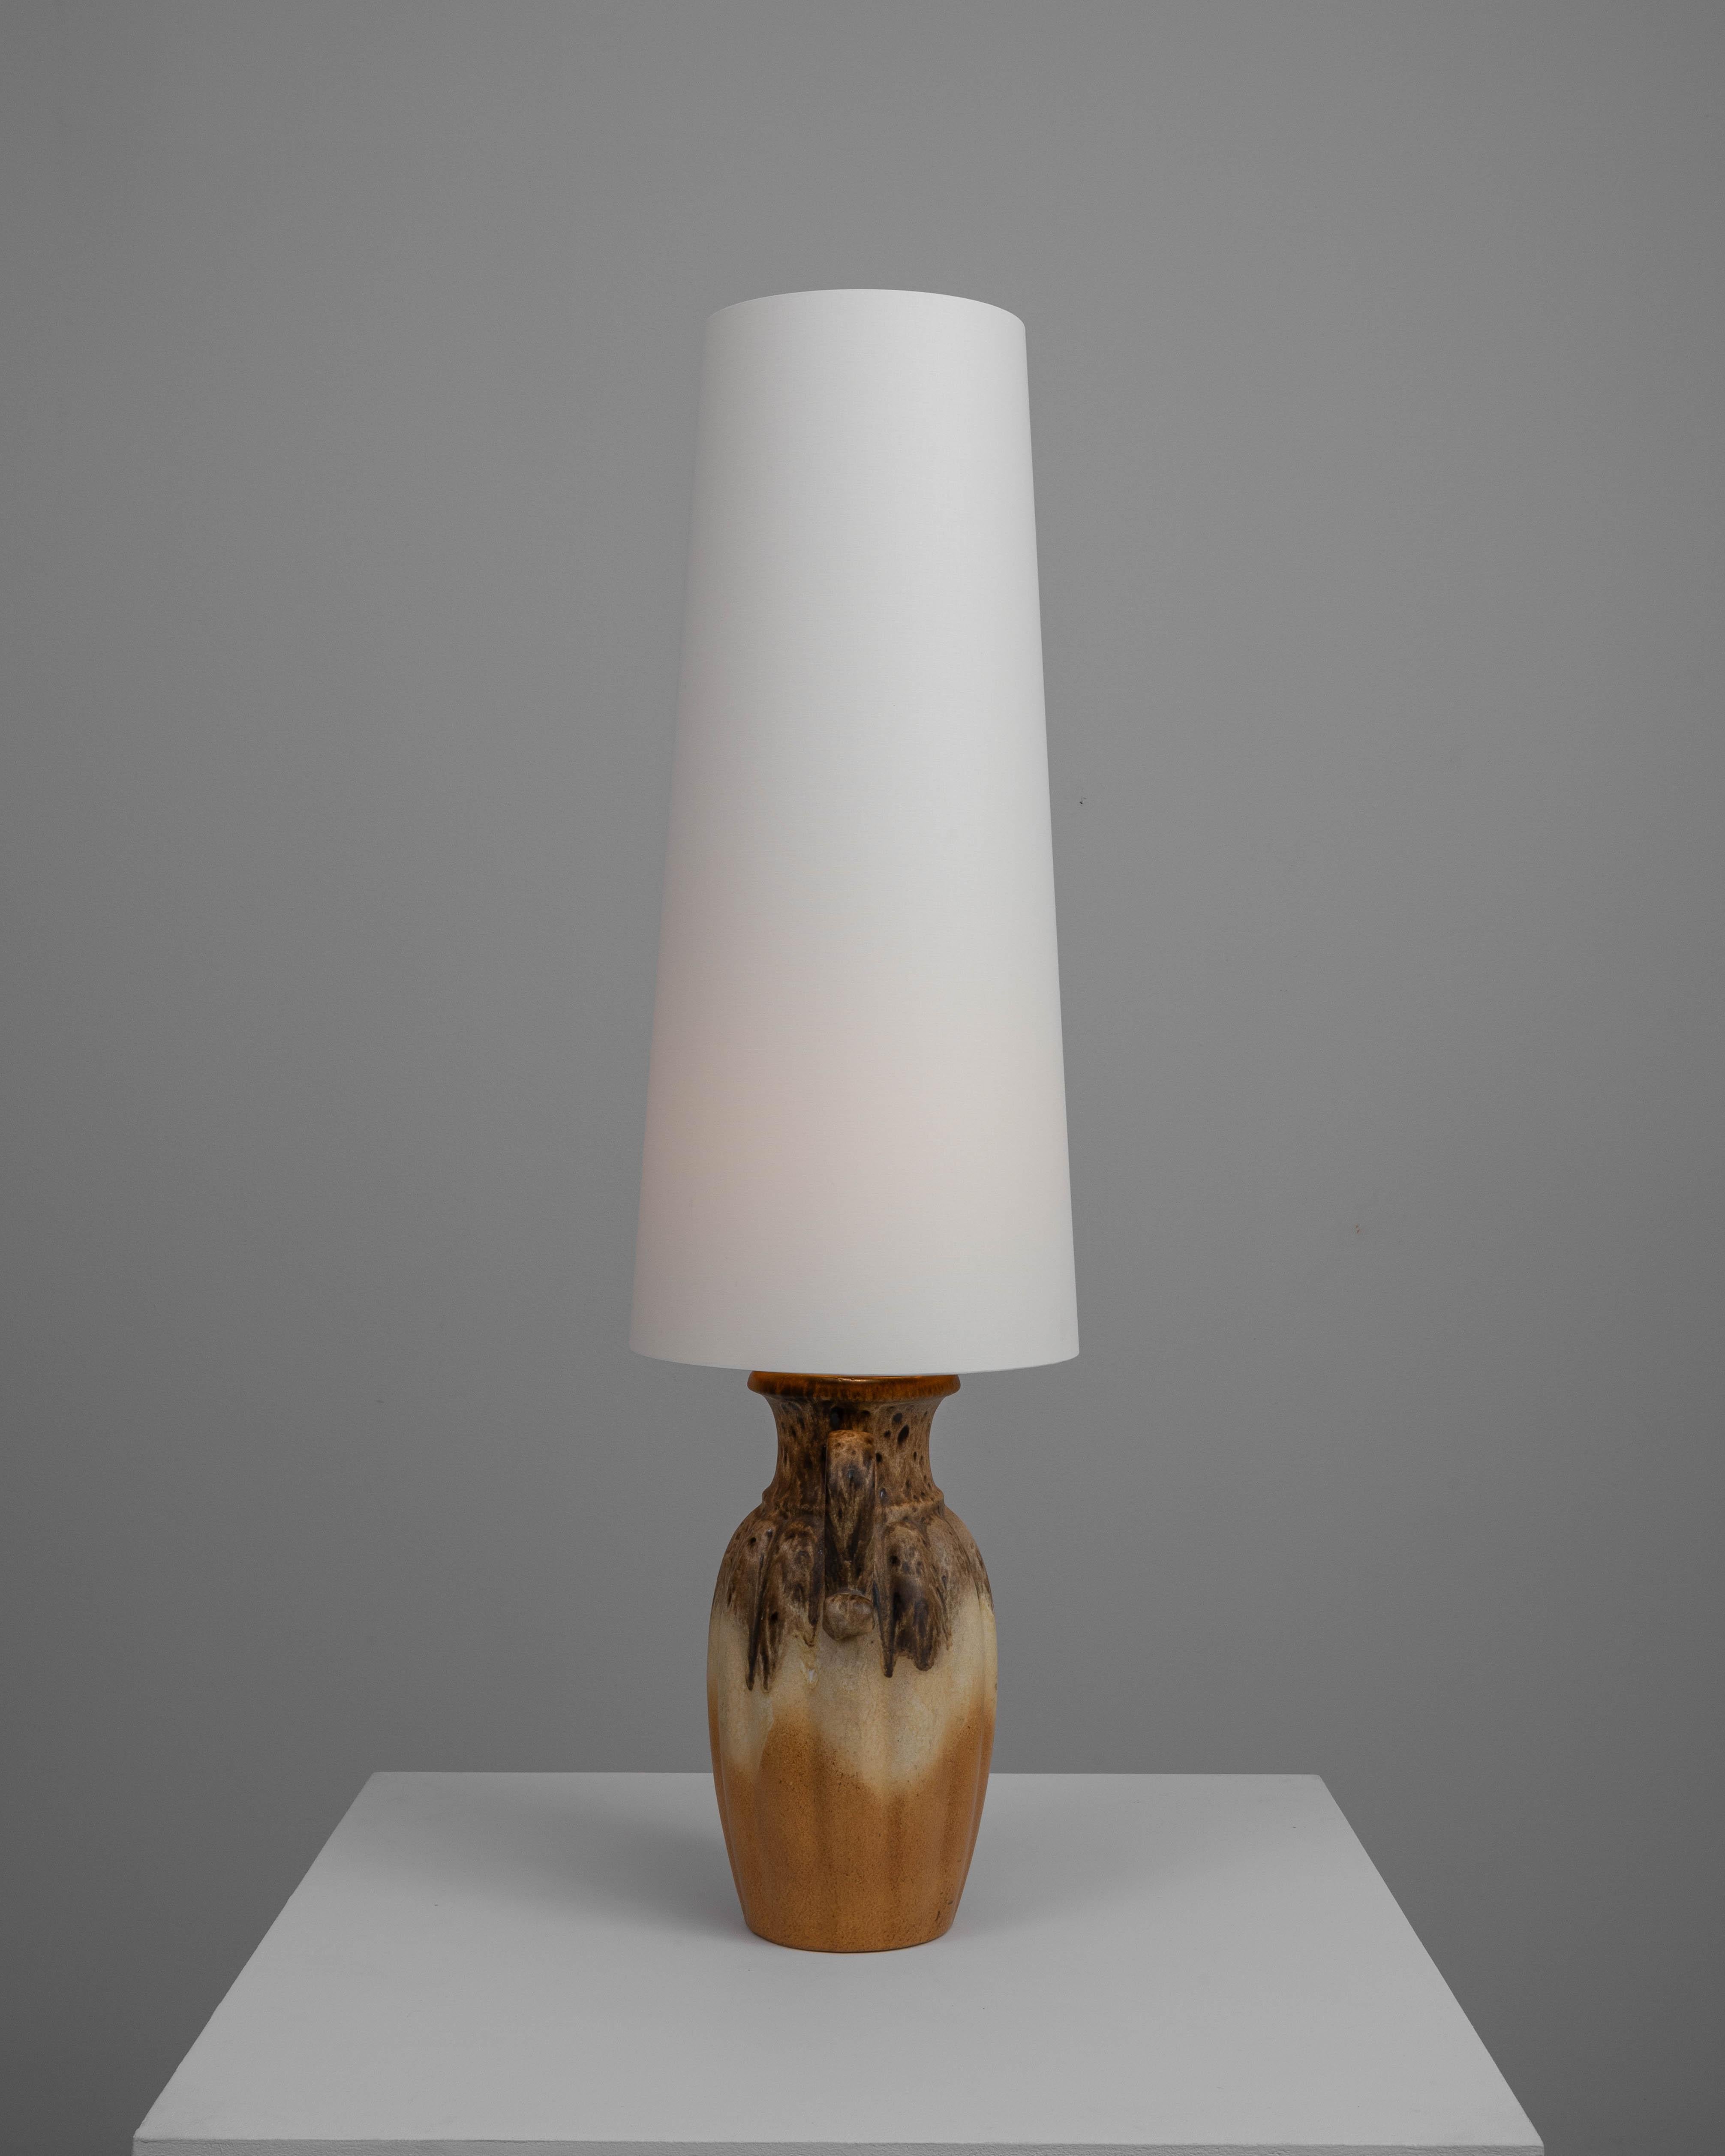 This 20th Century German Ceramic Table Lamp is an exemplary piece of mid-century craftsmanship. The base exhibits a robust, natural form with a dynamic, flowing glaze that combines earthen brown tones with hints of a darker, mottled overlay, giving